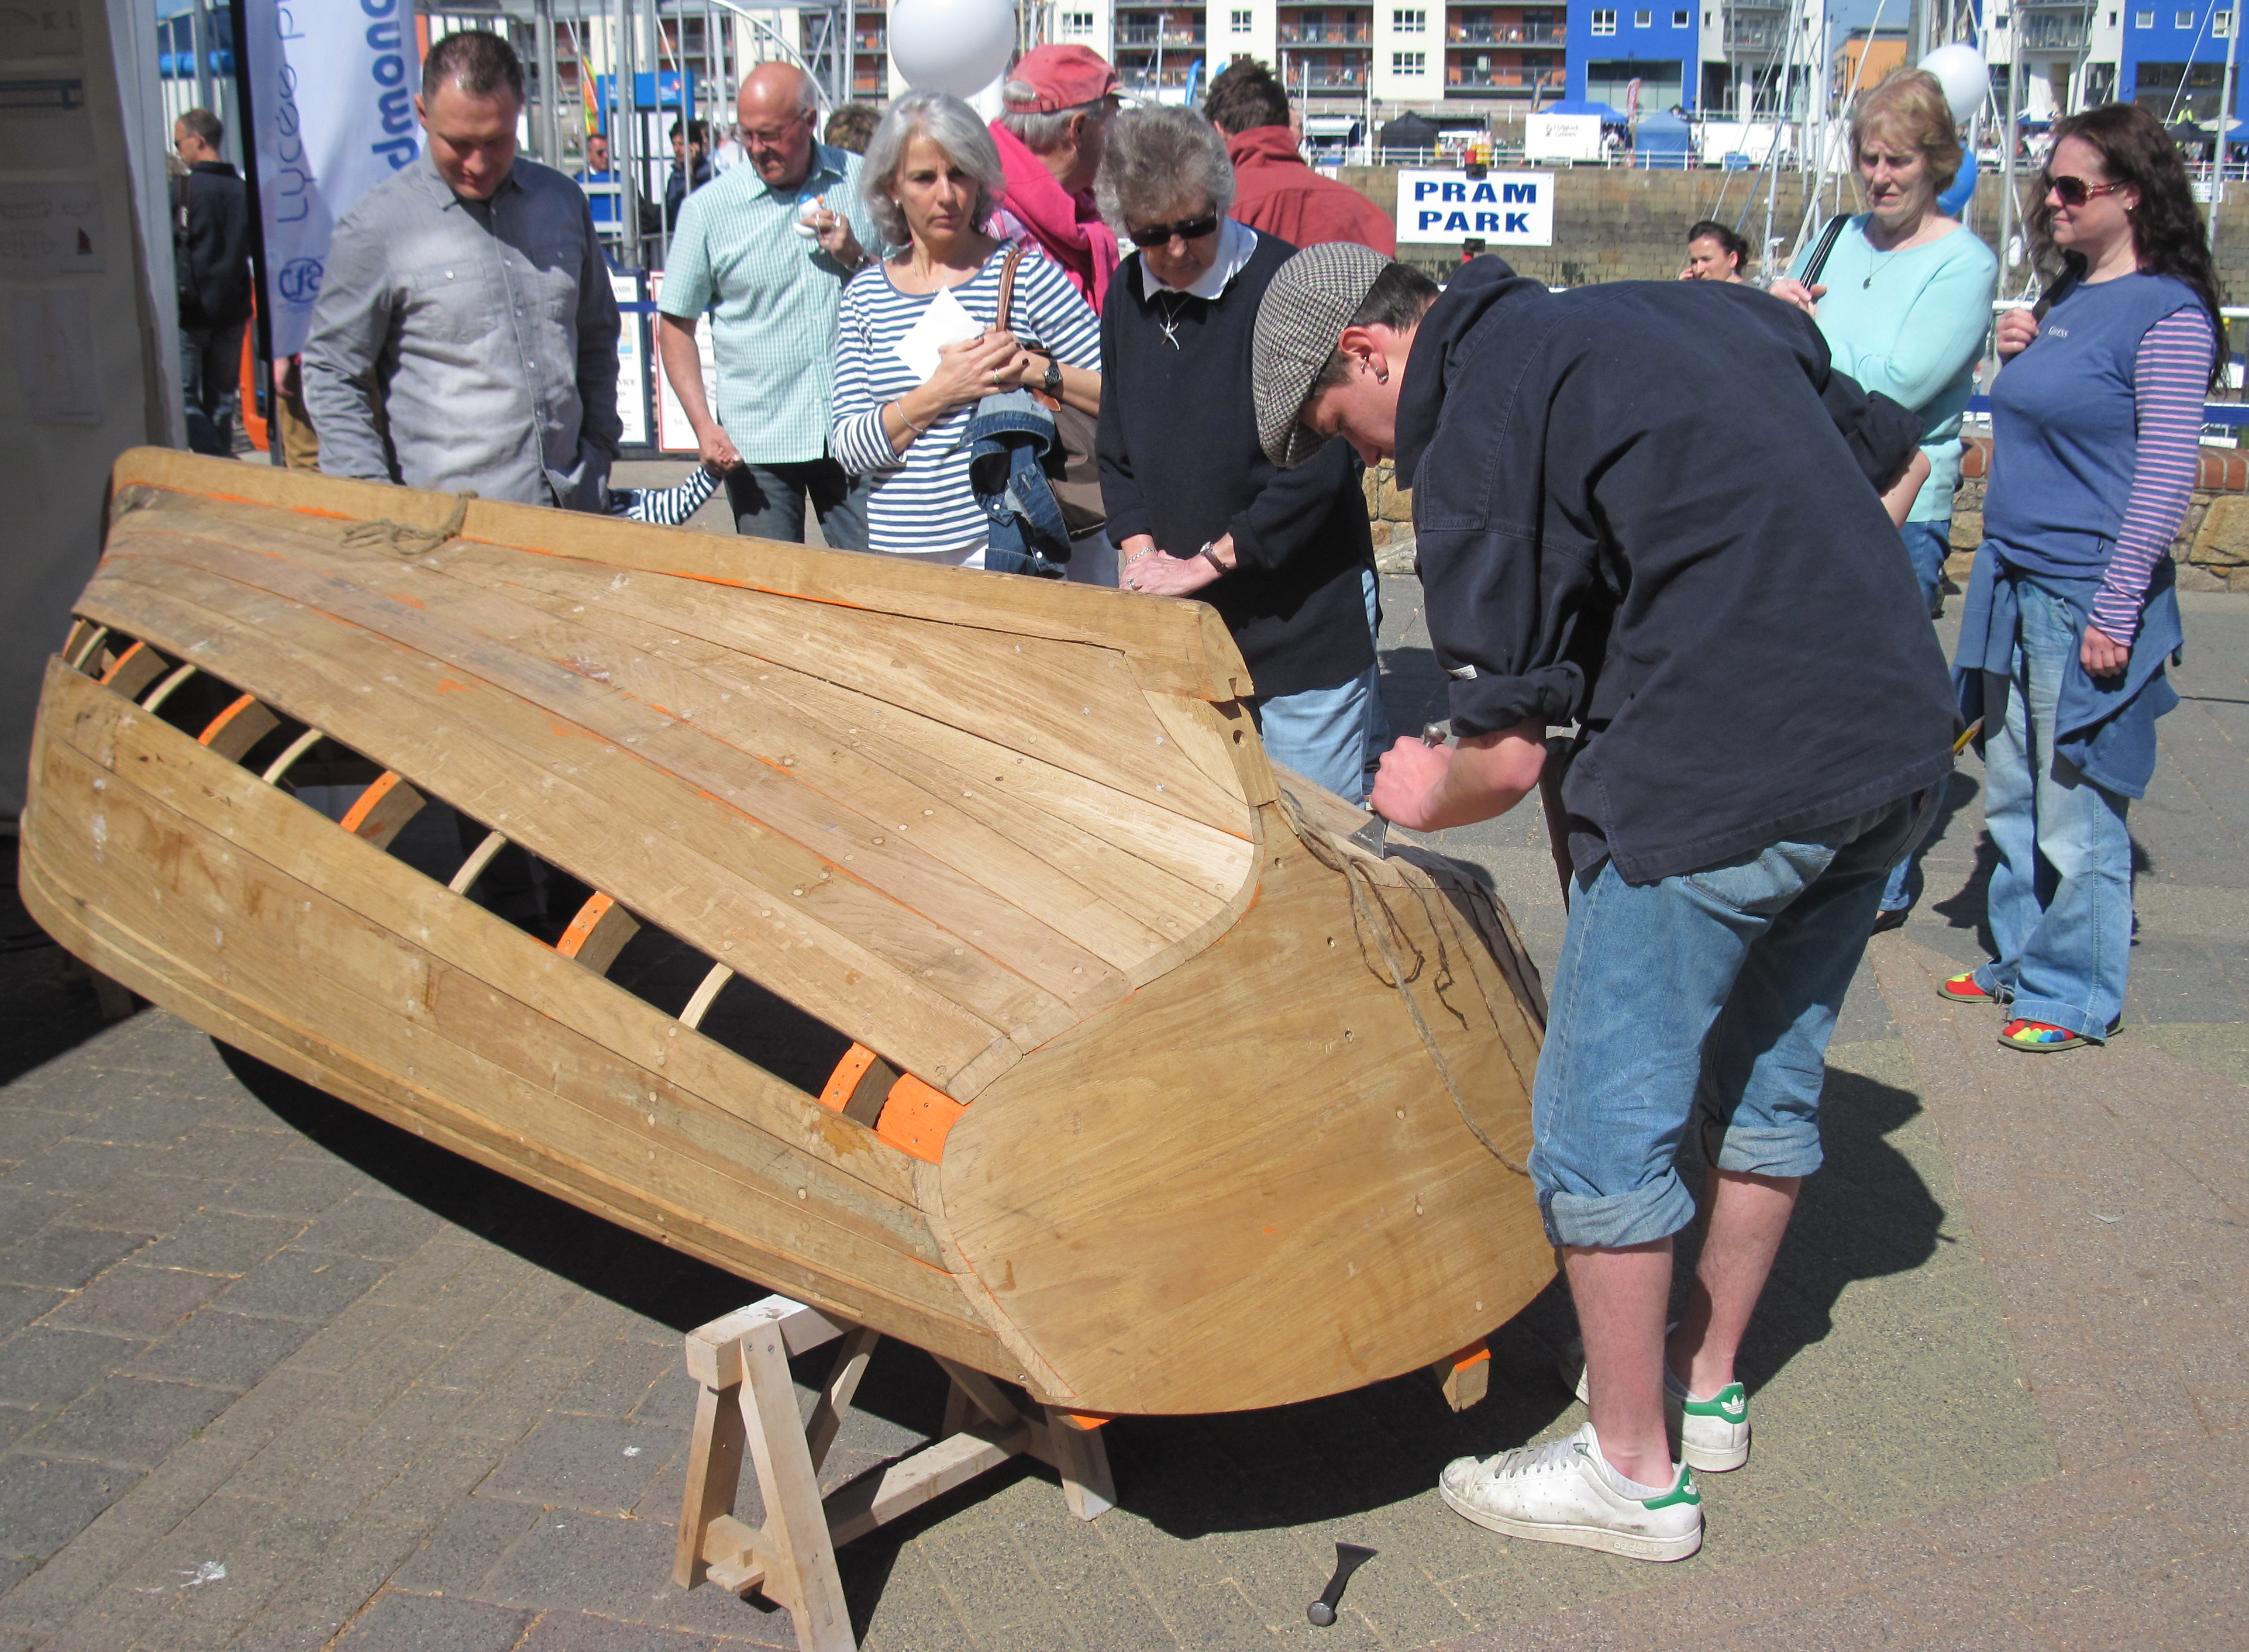 There wouldn't be much point in learning to sail if there wasn't also plenty of people learning how to build boats.